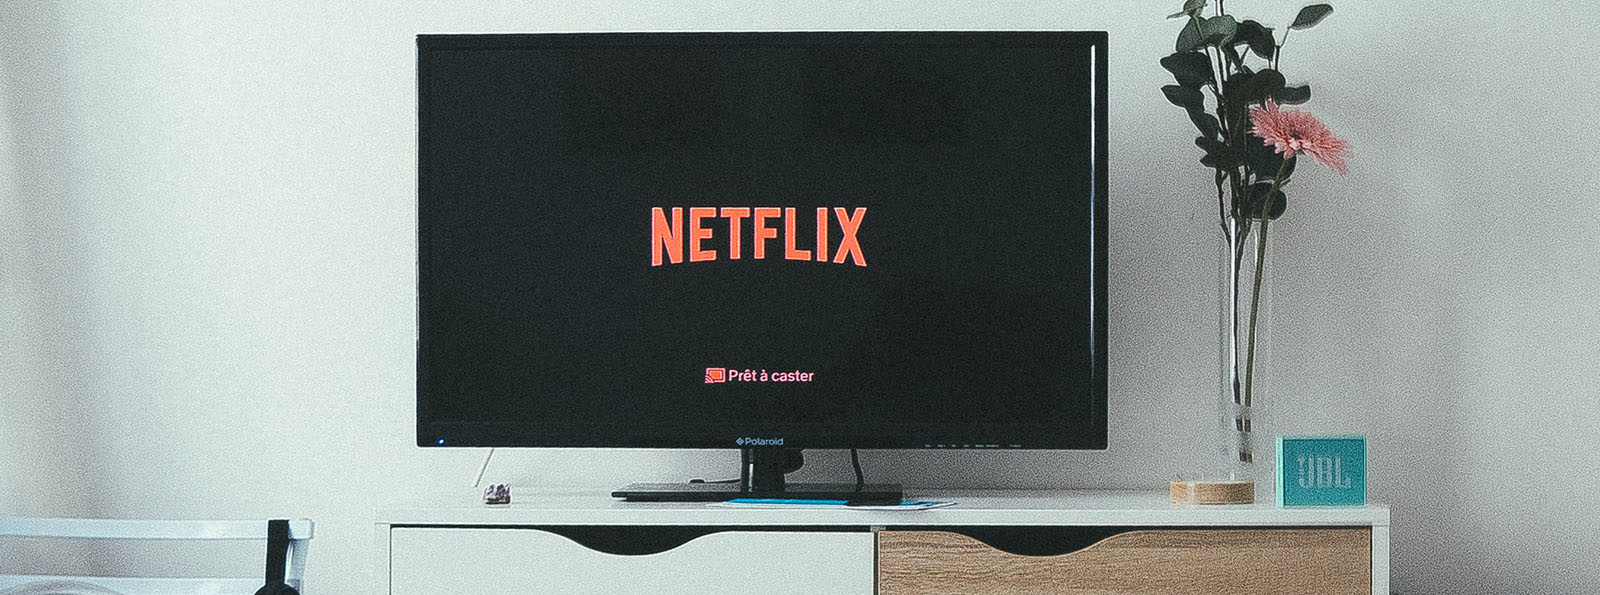 Image of a TV screen showing the Netflix logo